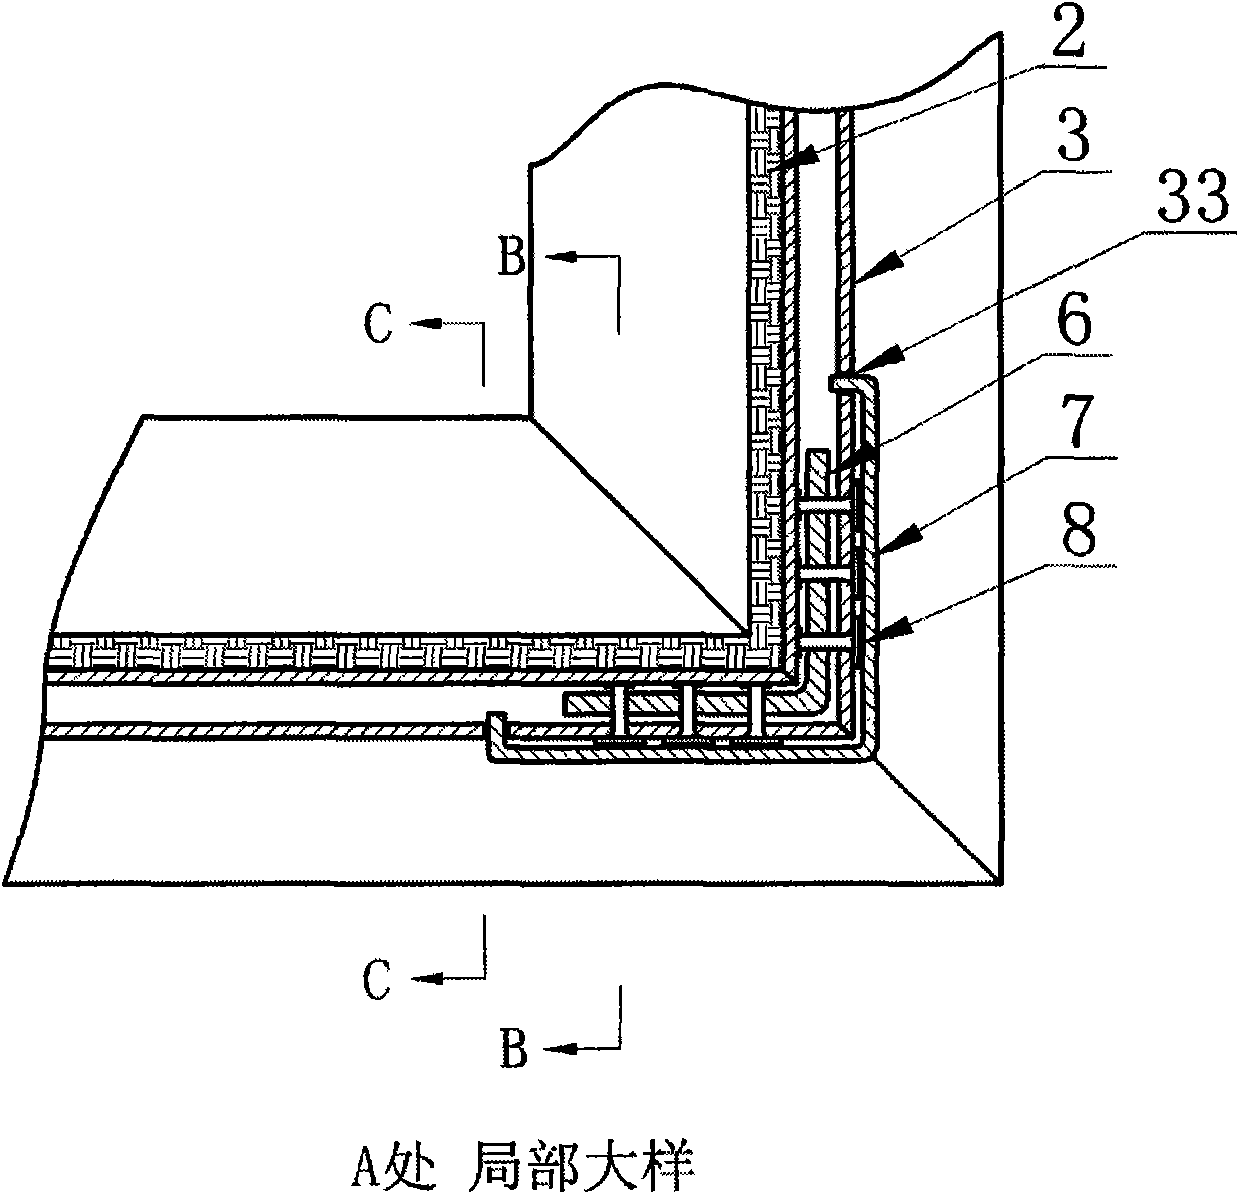 Fixed connection structure used for high speed railway sound barrier transparent cell boards